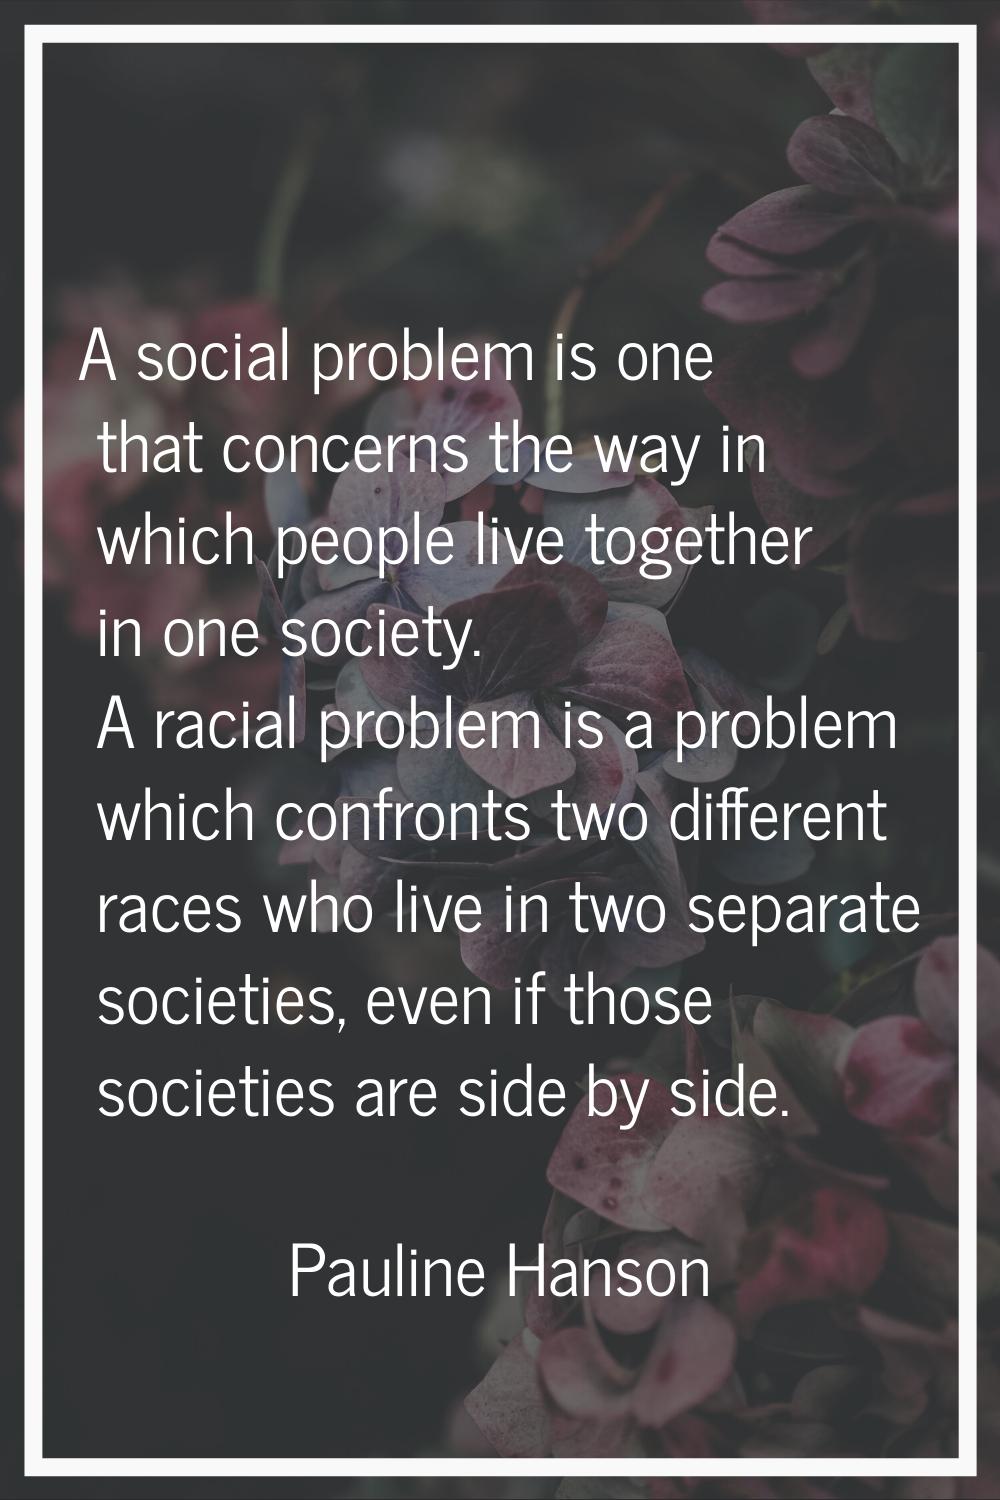 A social problem is one that concerns the way in which people live together in one society. A racia